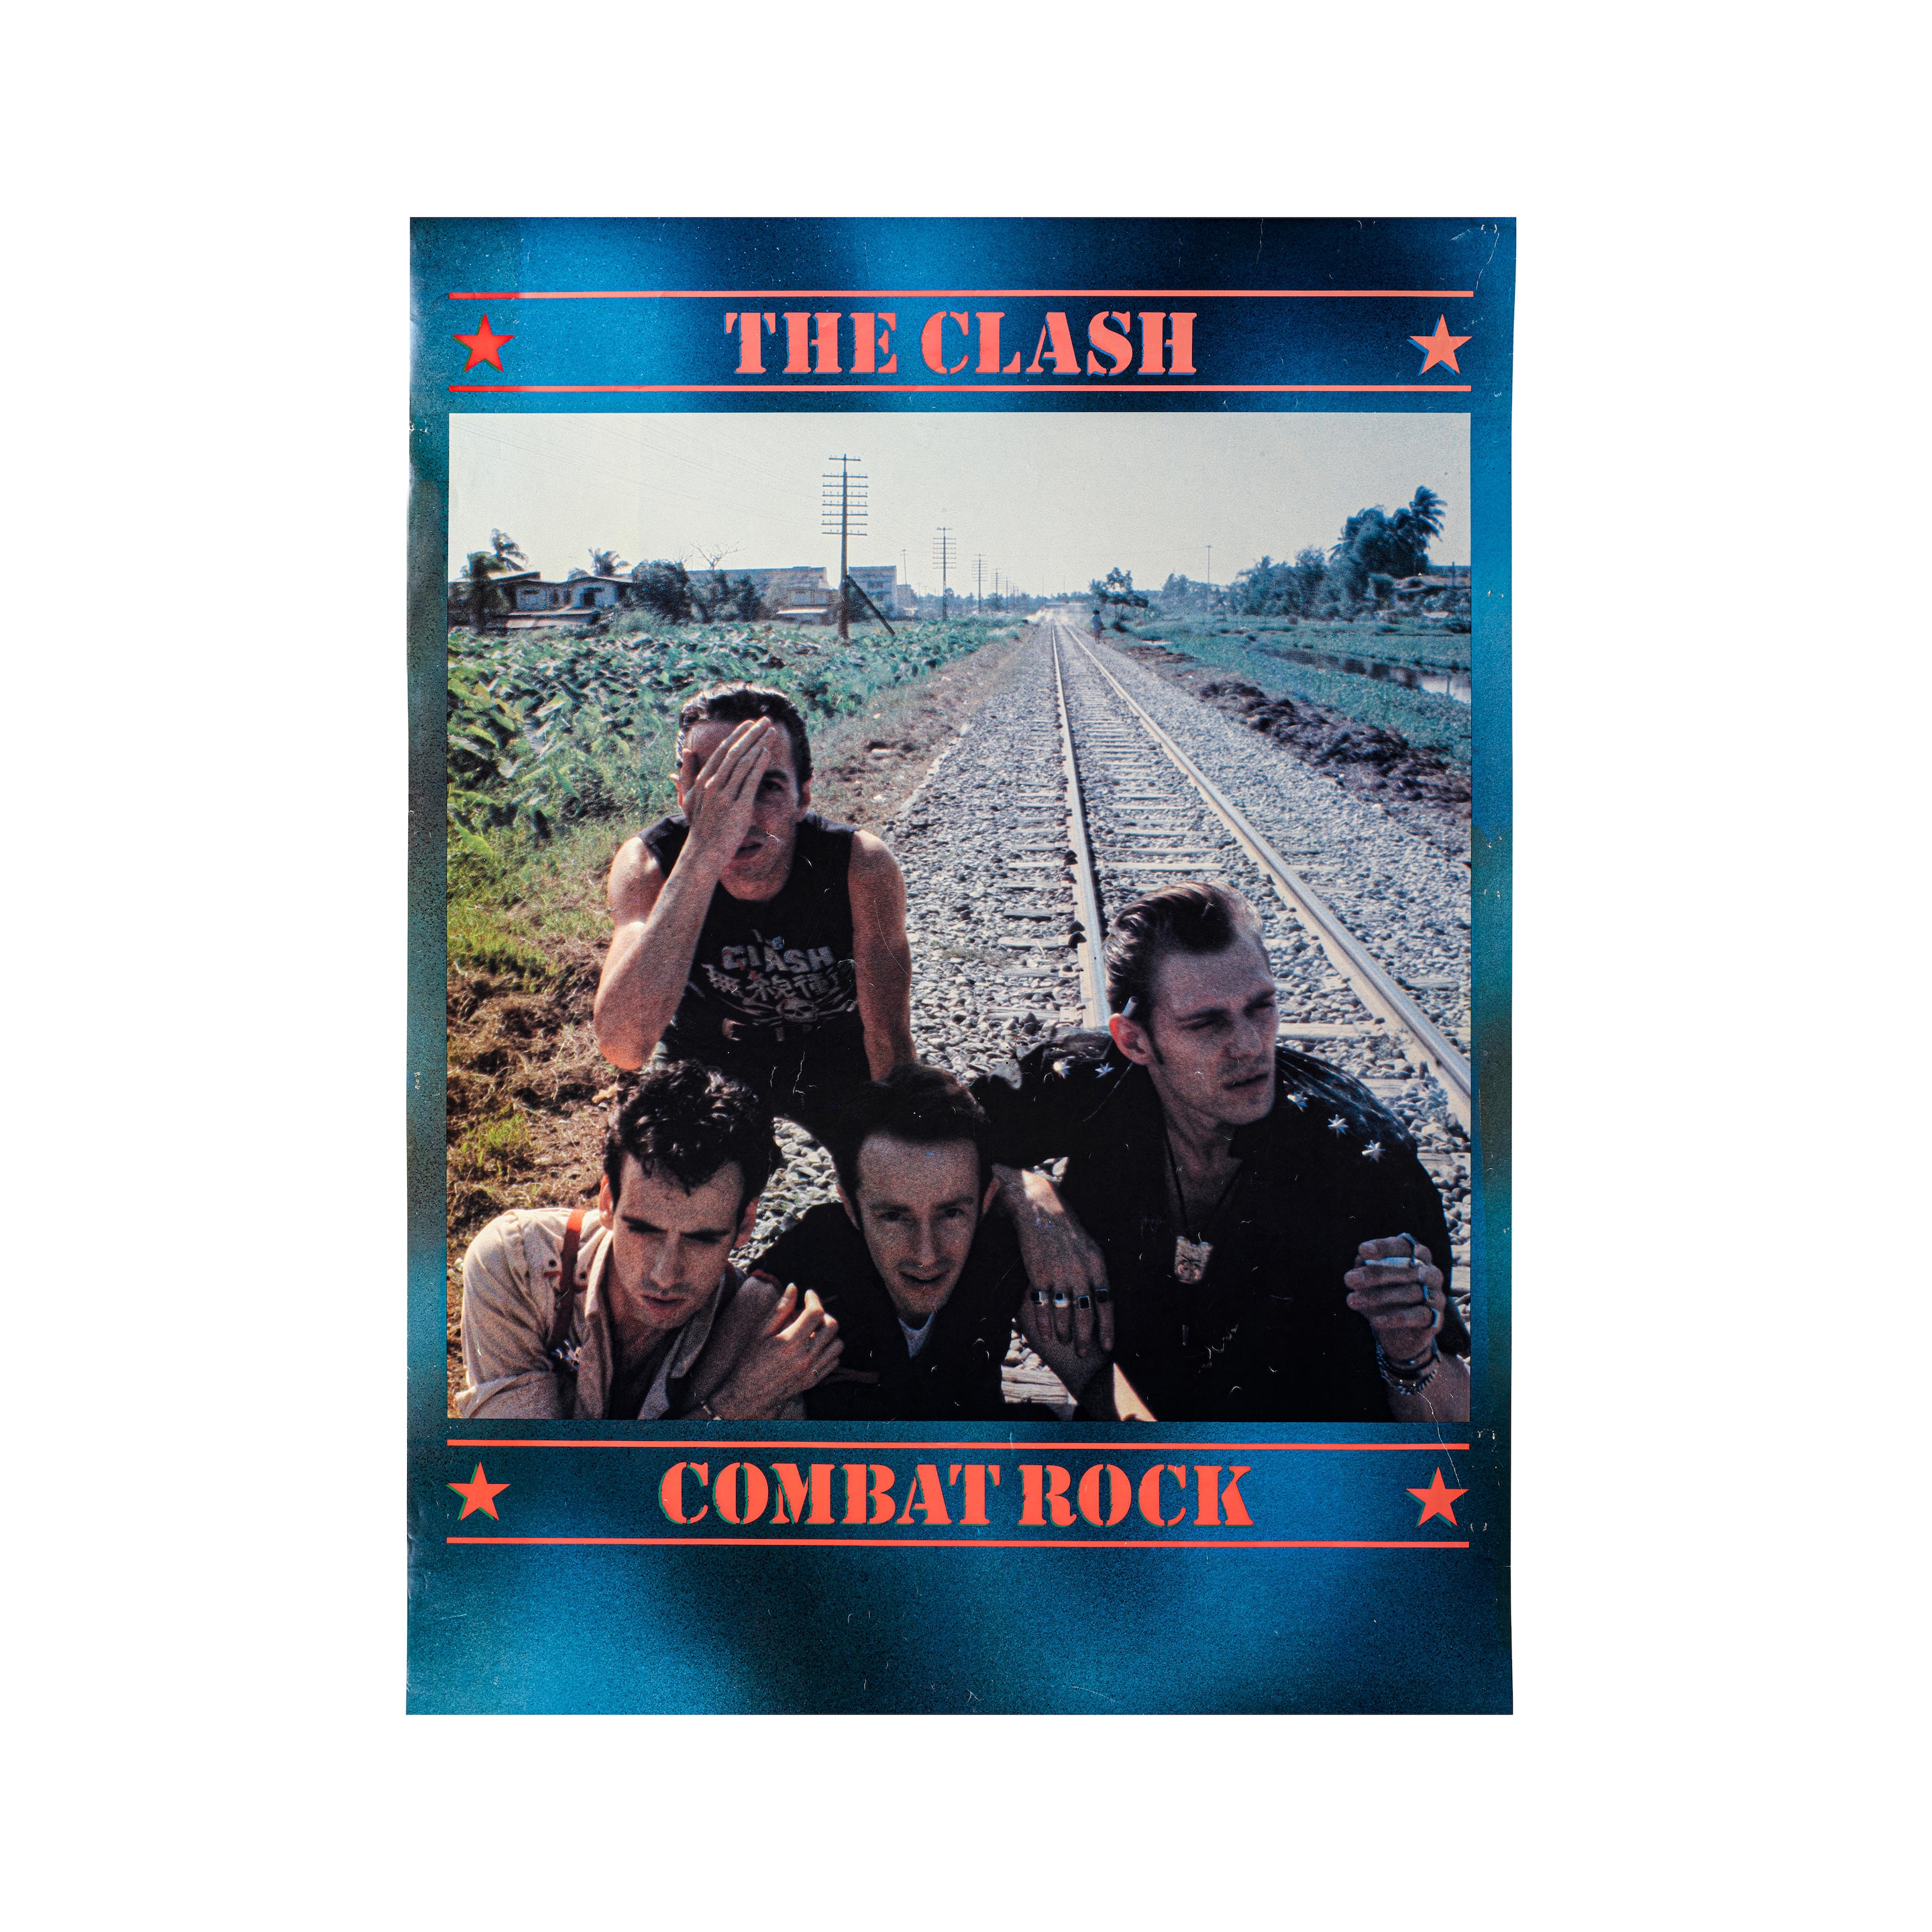 The Clash | THE CLASH: COMBAT ROCK U.S. PROMOTIONAL POSTER (1982